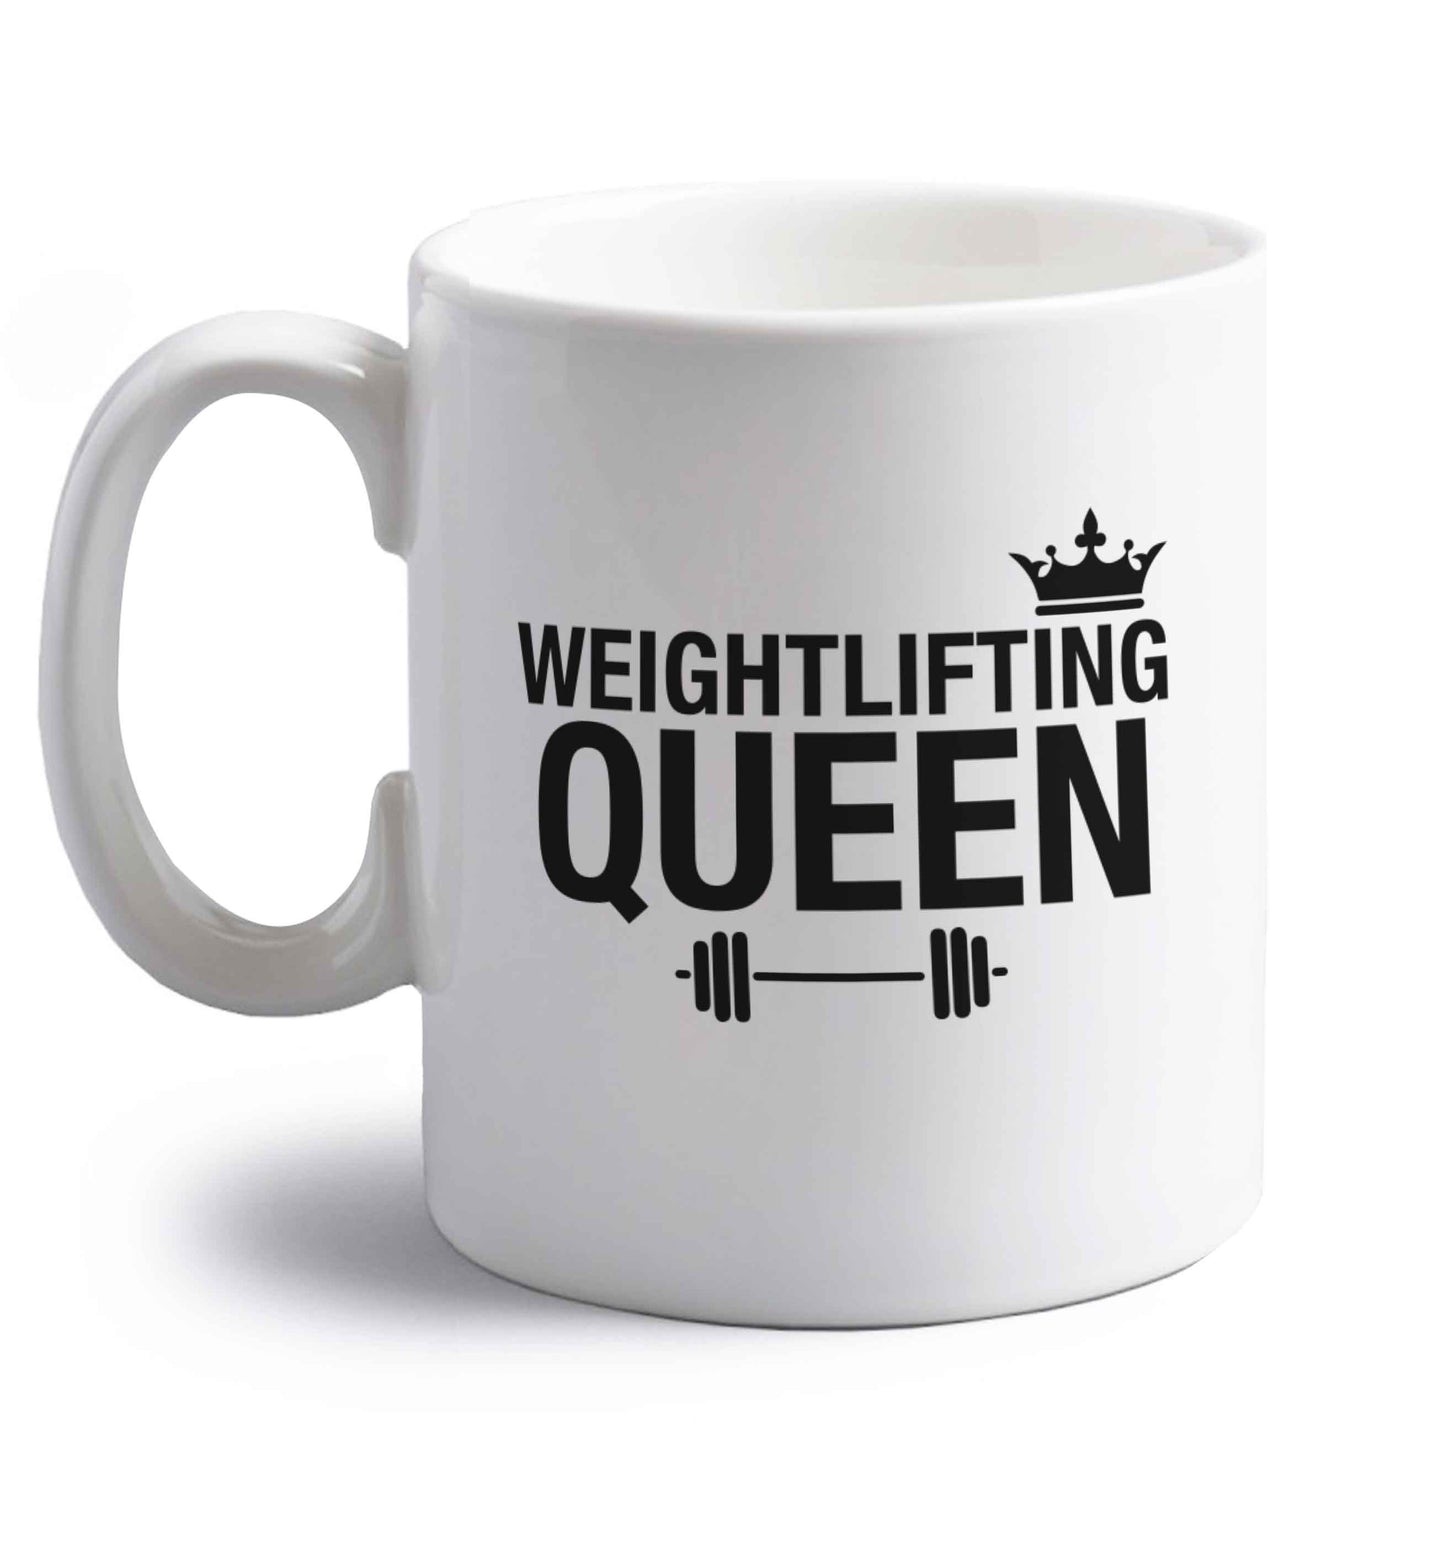 Weightlifting Queen right handed white ceramic mug 